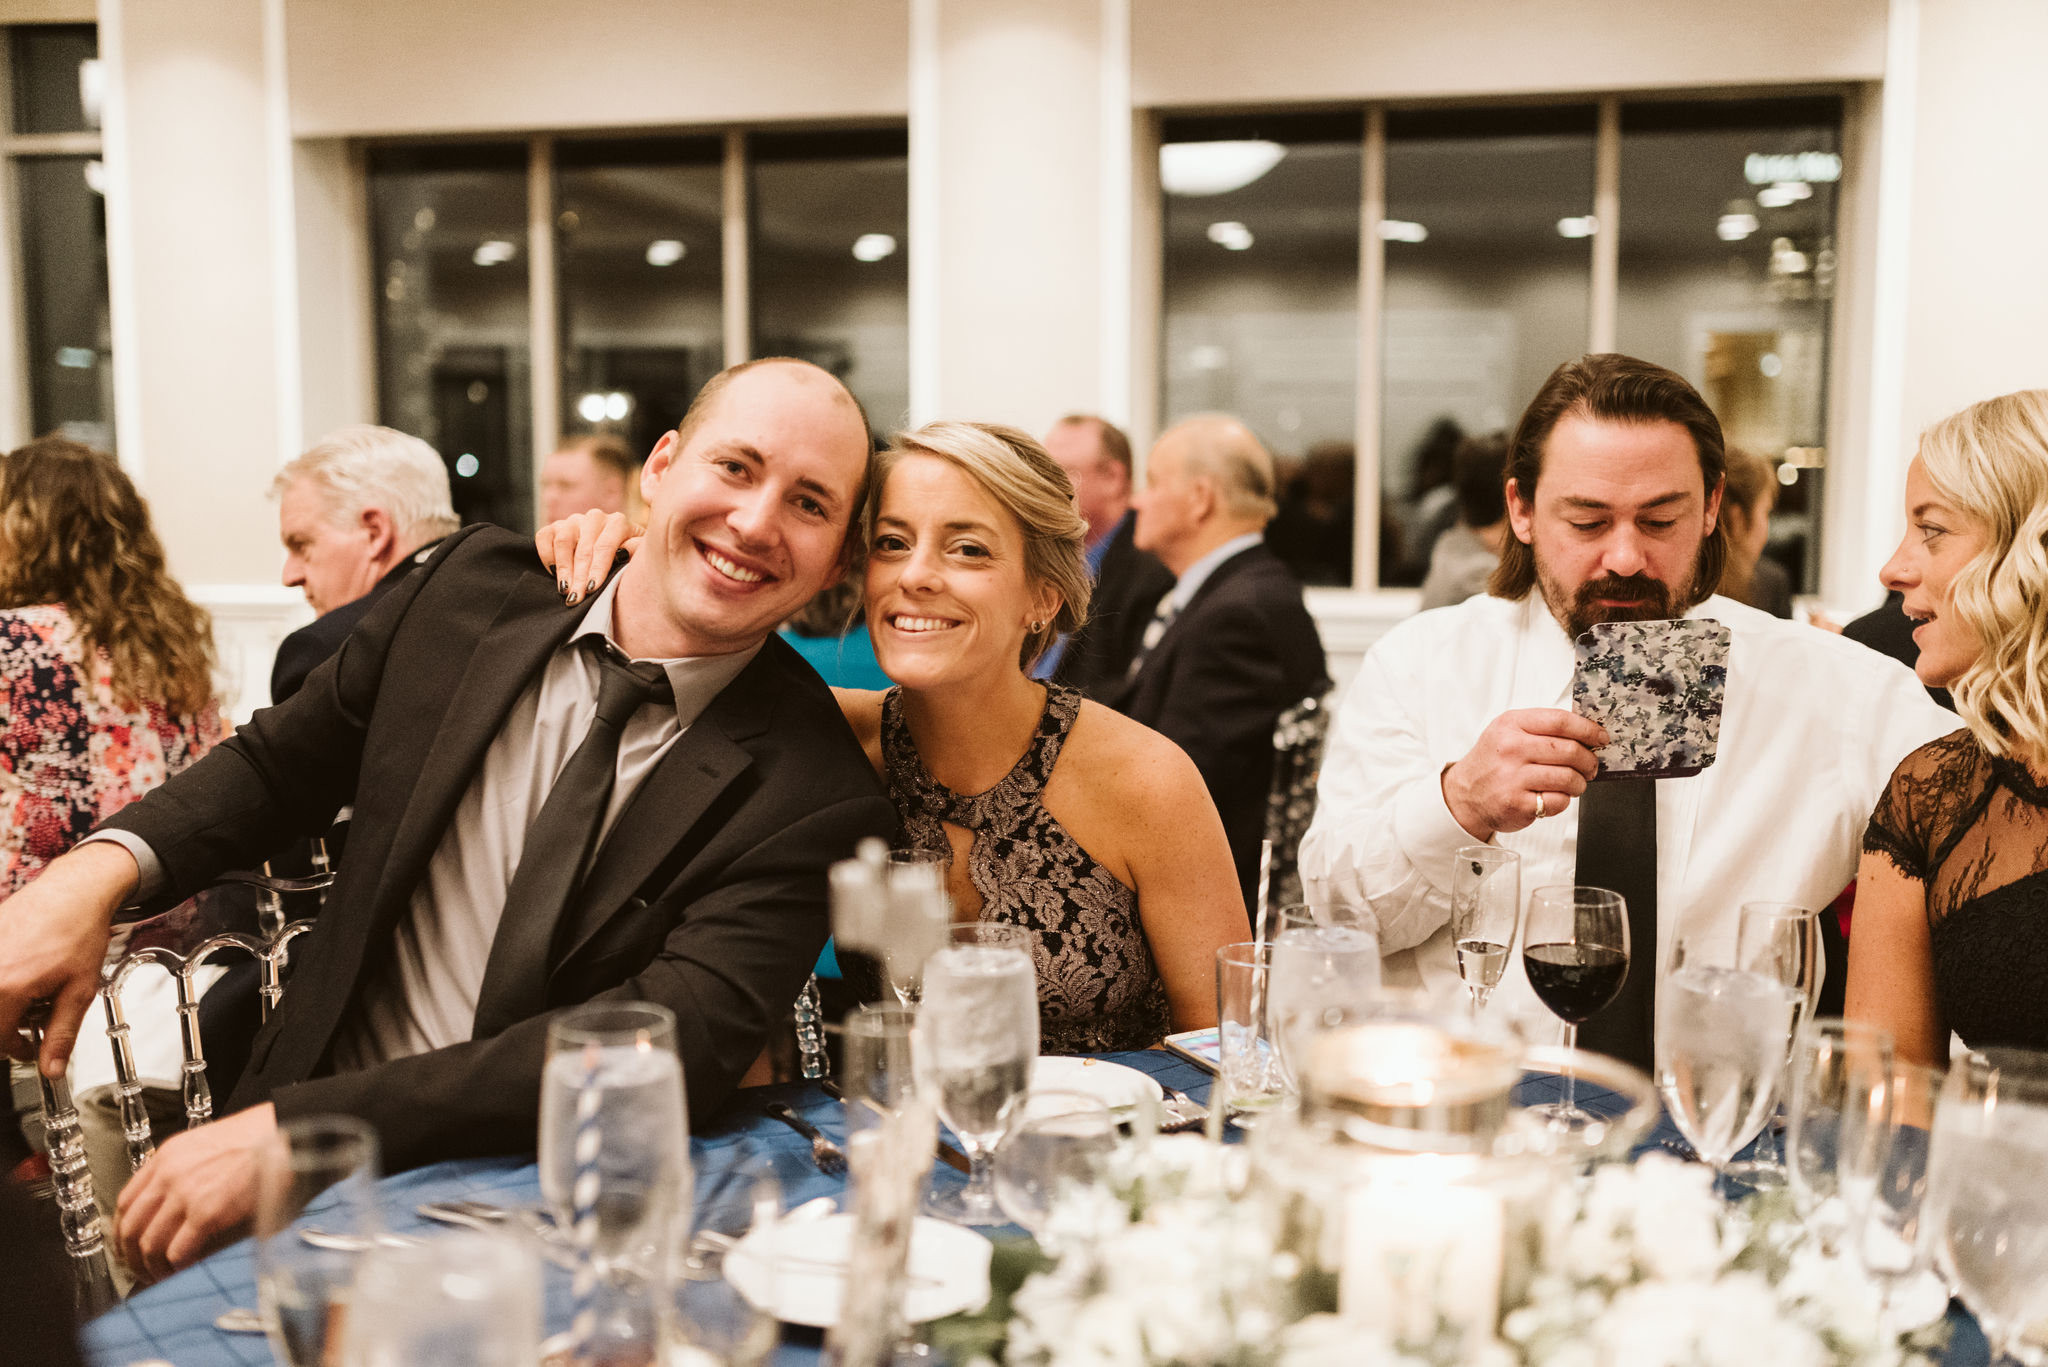  Baltimore, Fells Point, Maryland Wedding Photographer, Winter Wedding, Historic, Classic, Vintage, Photo of Friends at Table During Reception, Select Event Group 